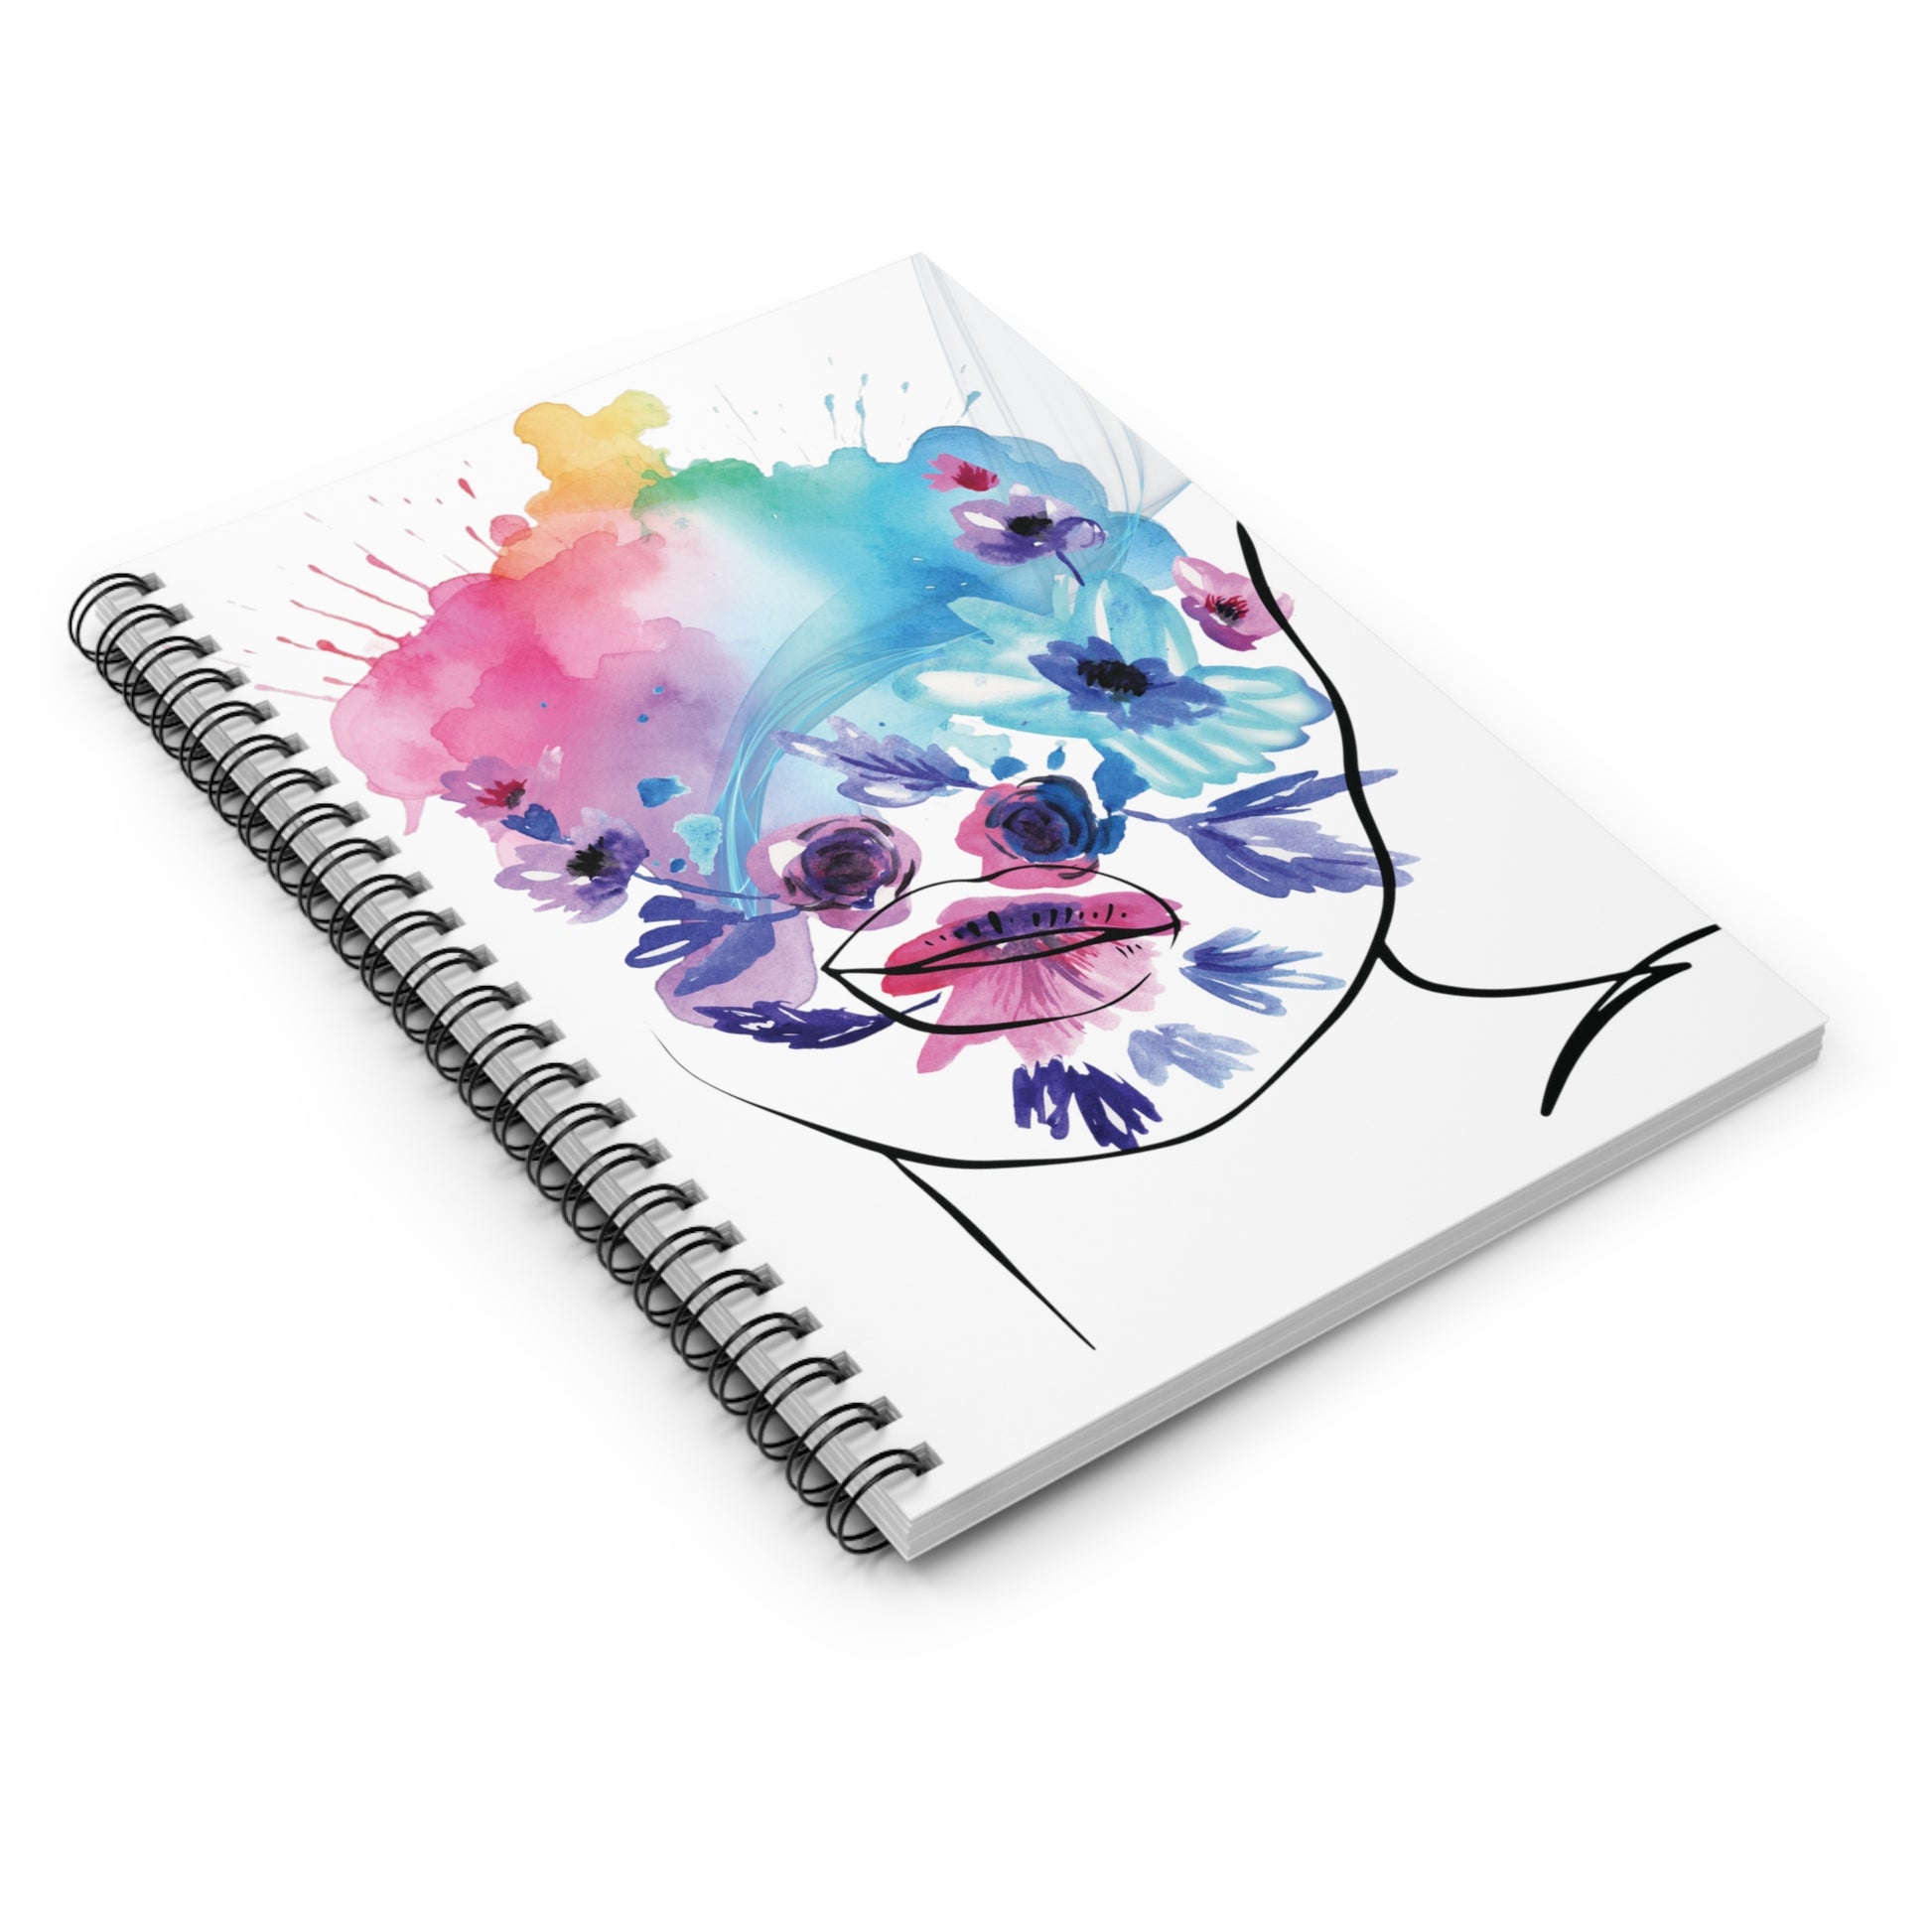 Kiss Me: Spiral Notebook - Log Books - Journals - Diaries - and More Custom Printed by TheGlassyLass